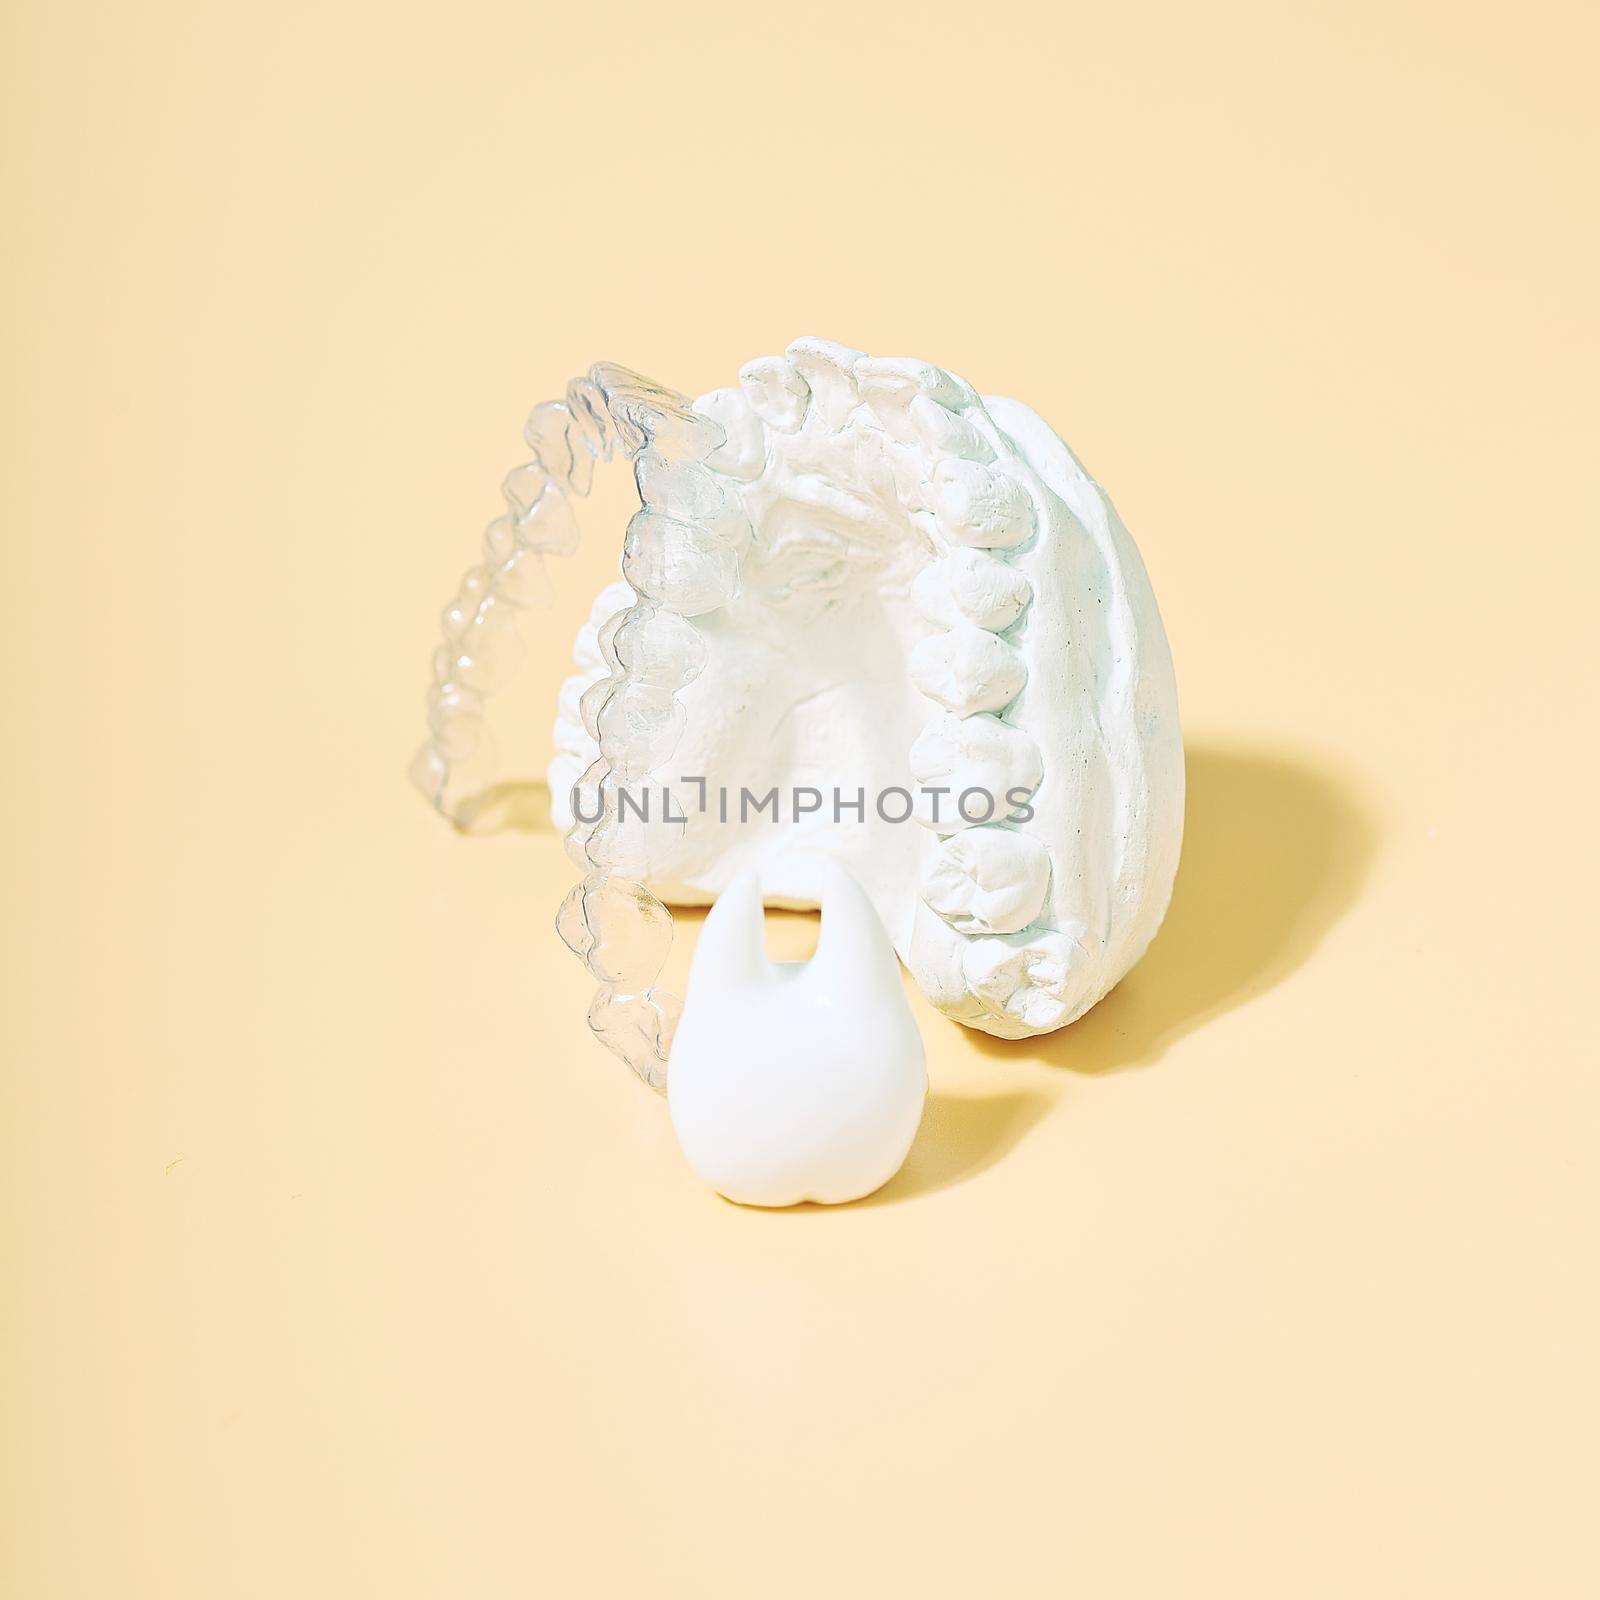 Orthodontic dental theme on  yellow background.Transparent invisible dental aligners or braces aplicable for an orthodontic dental treatment by Maximusnd